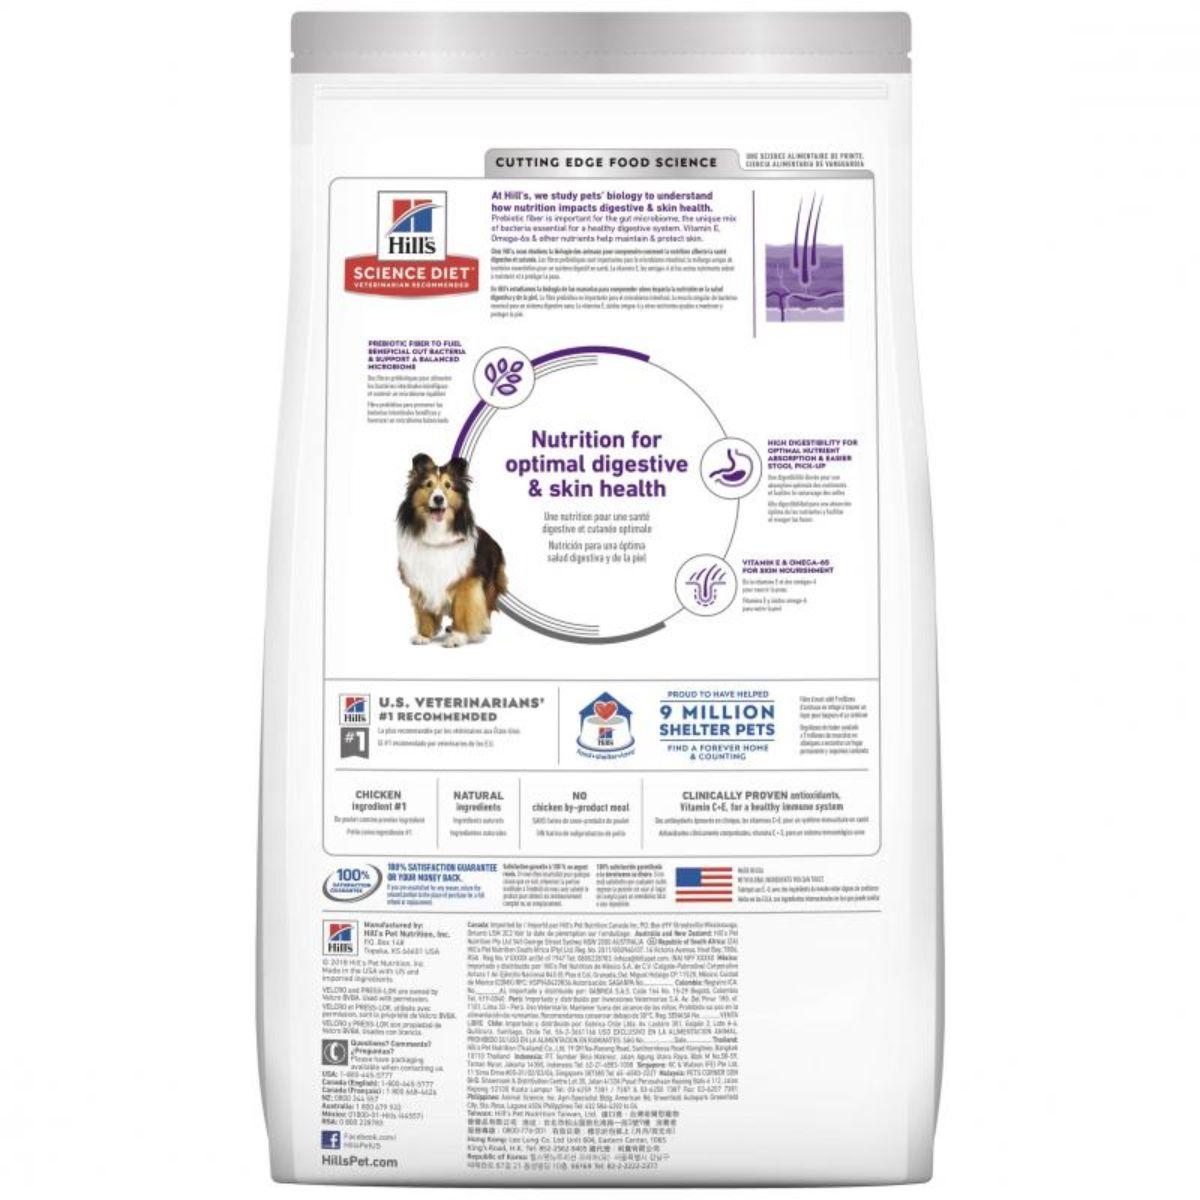 Hill's Science Diet Sensitive Stomach & Skin Dry Dog Food